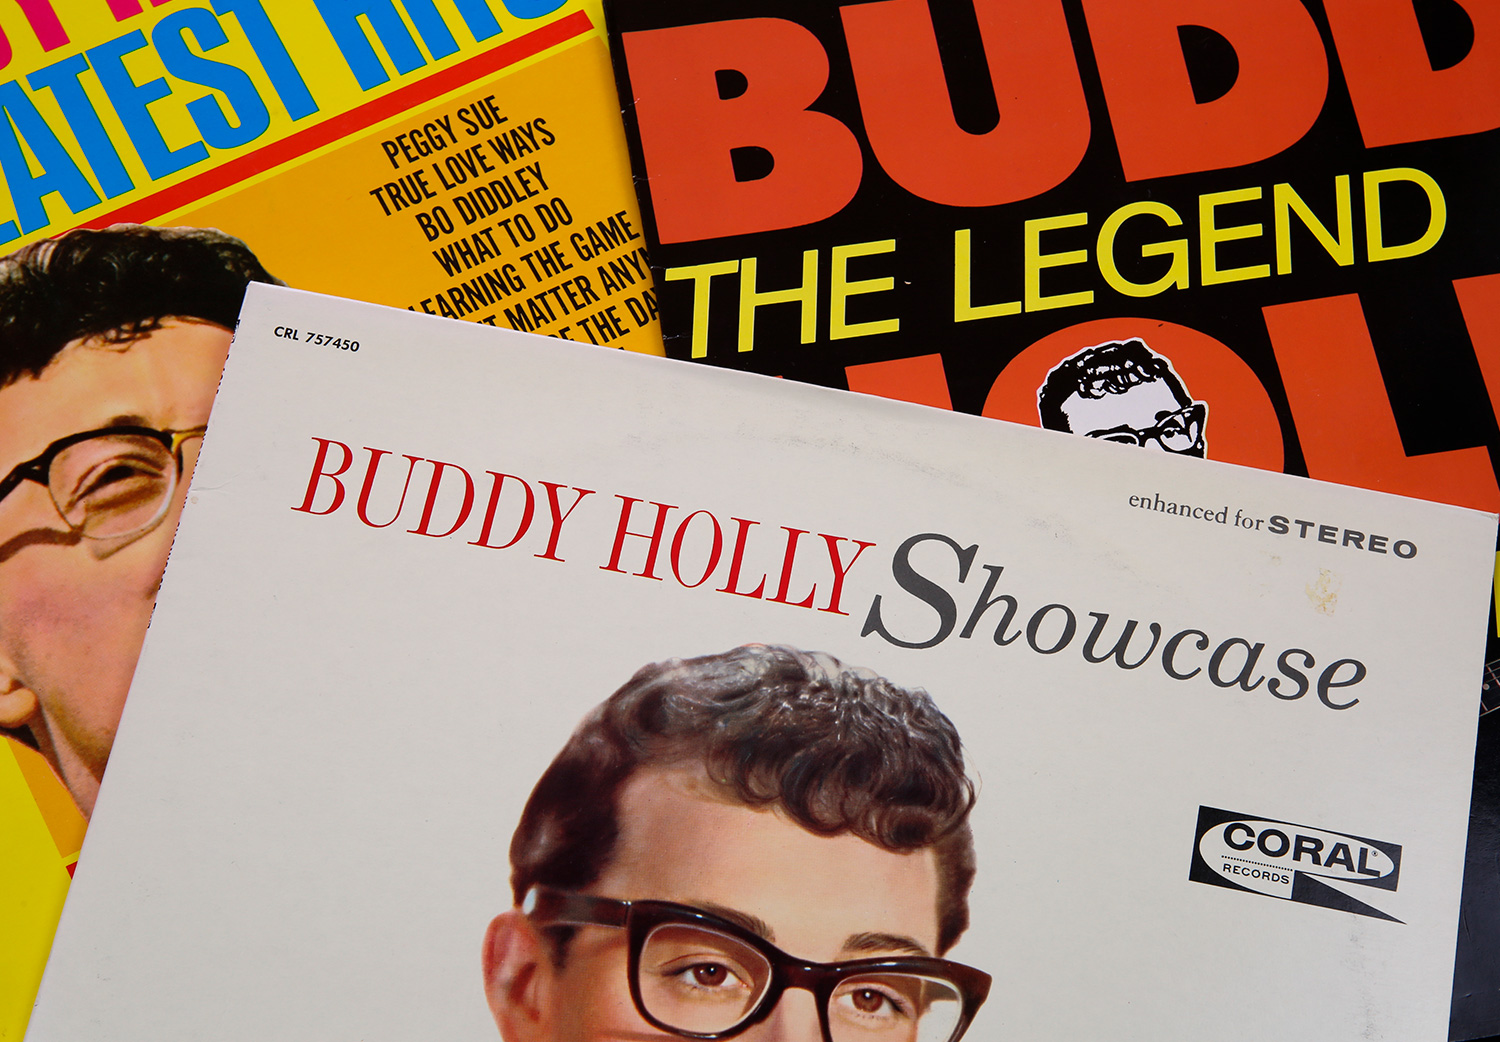 murió-el-rock-and-roll-buddy-holly